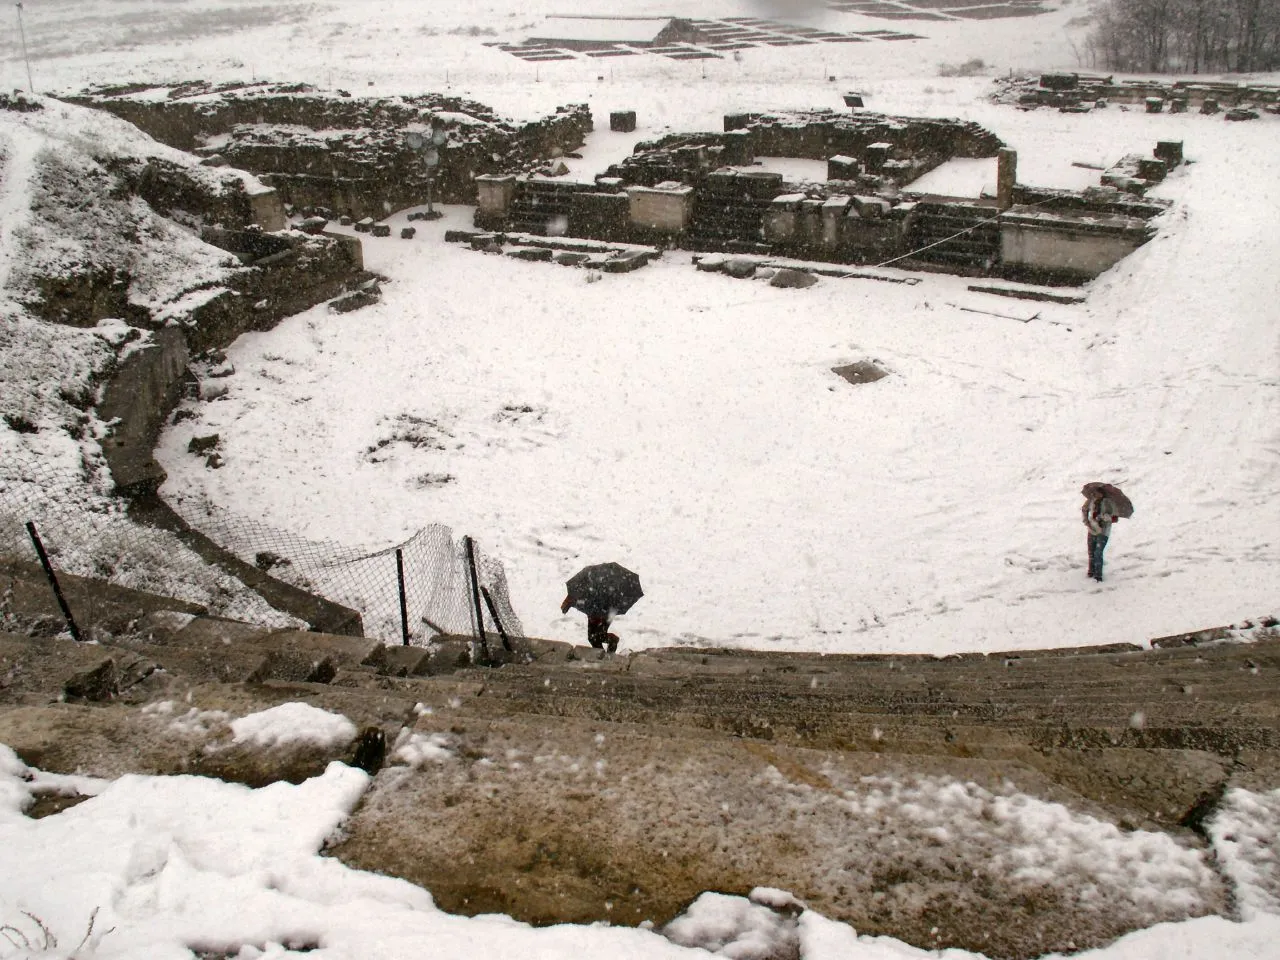 Photo showing: The Roman theater of Stobi (ancient Στόβοι) in the snow. Unlike most other images, this one does not only show the cavea and the orchestra but also the ruins of the scaenae building. (See Roman theatre for general information on the architecture.)